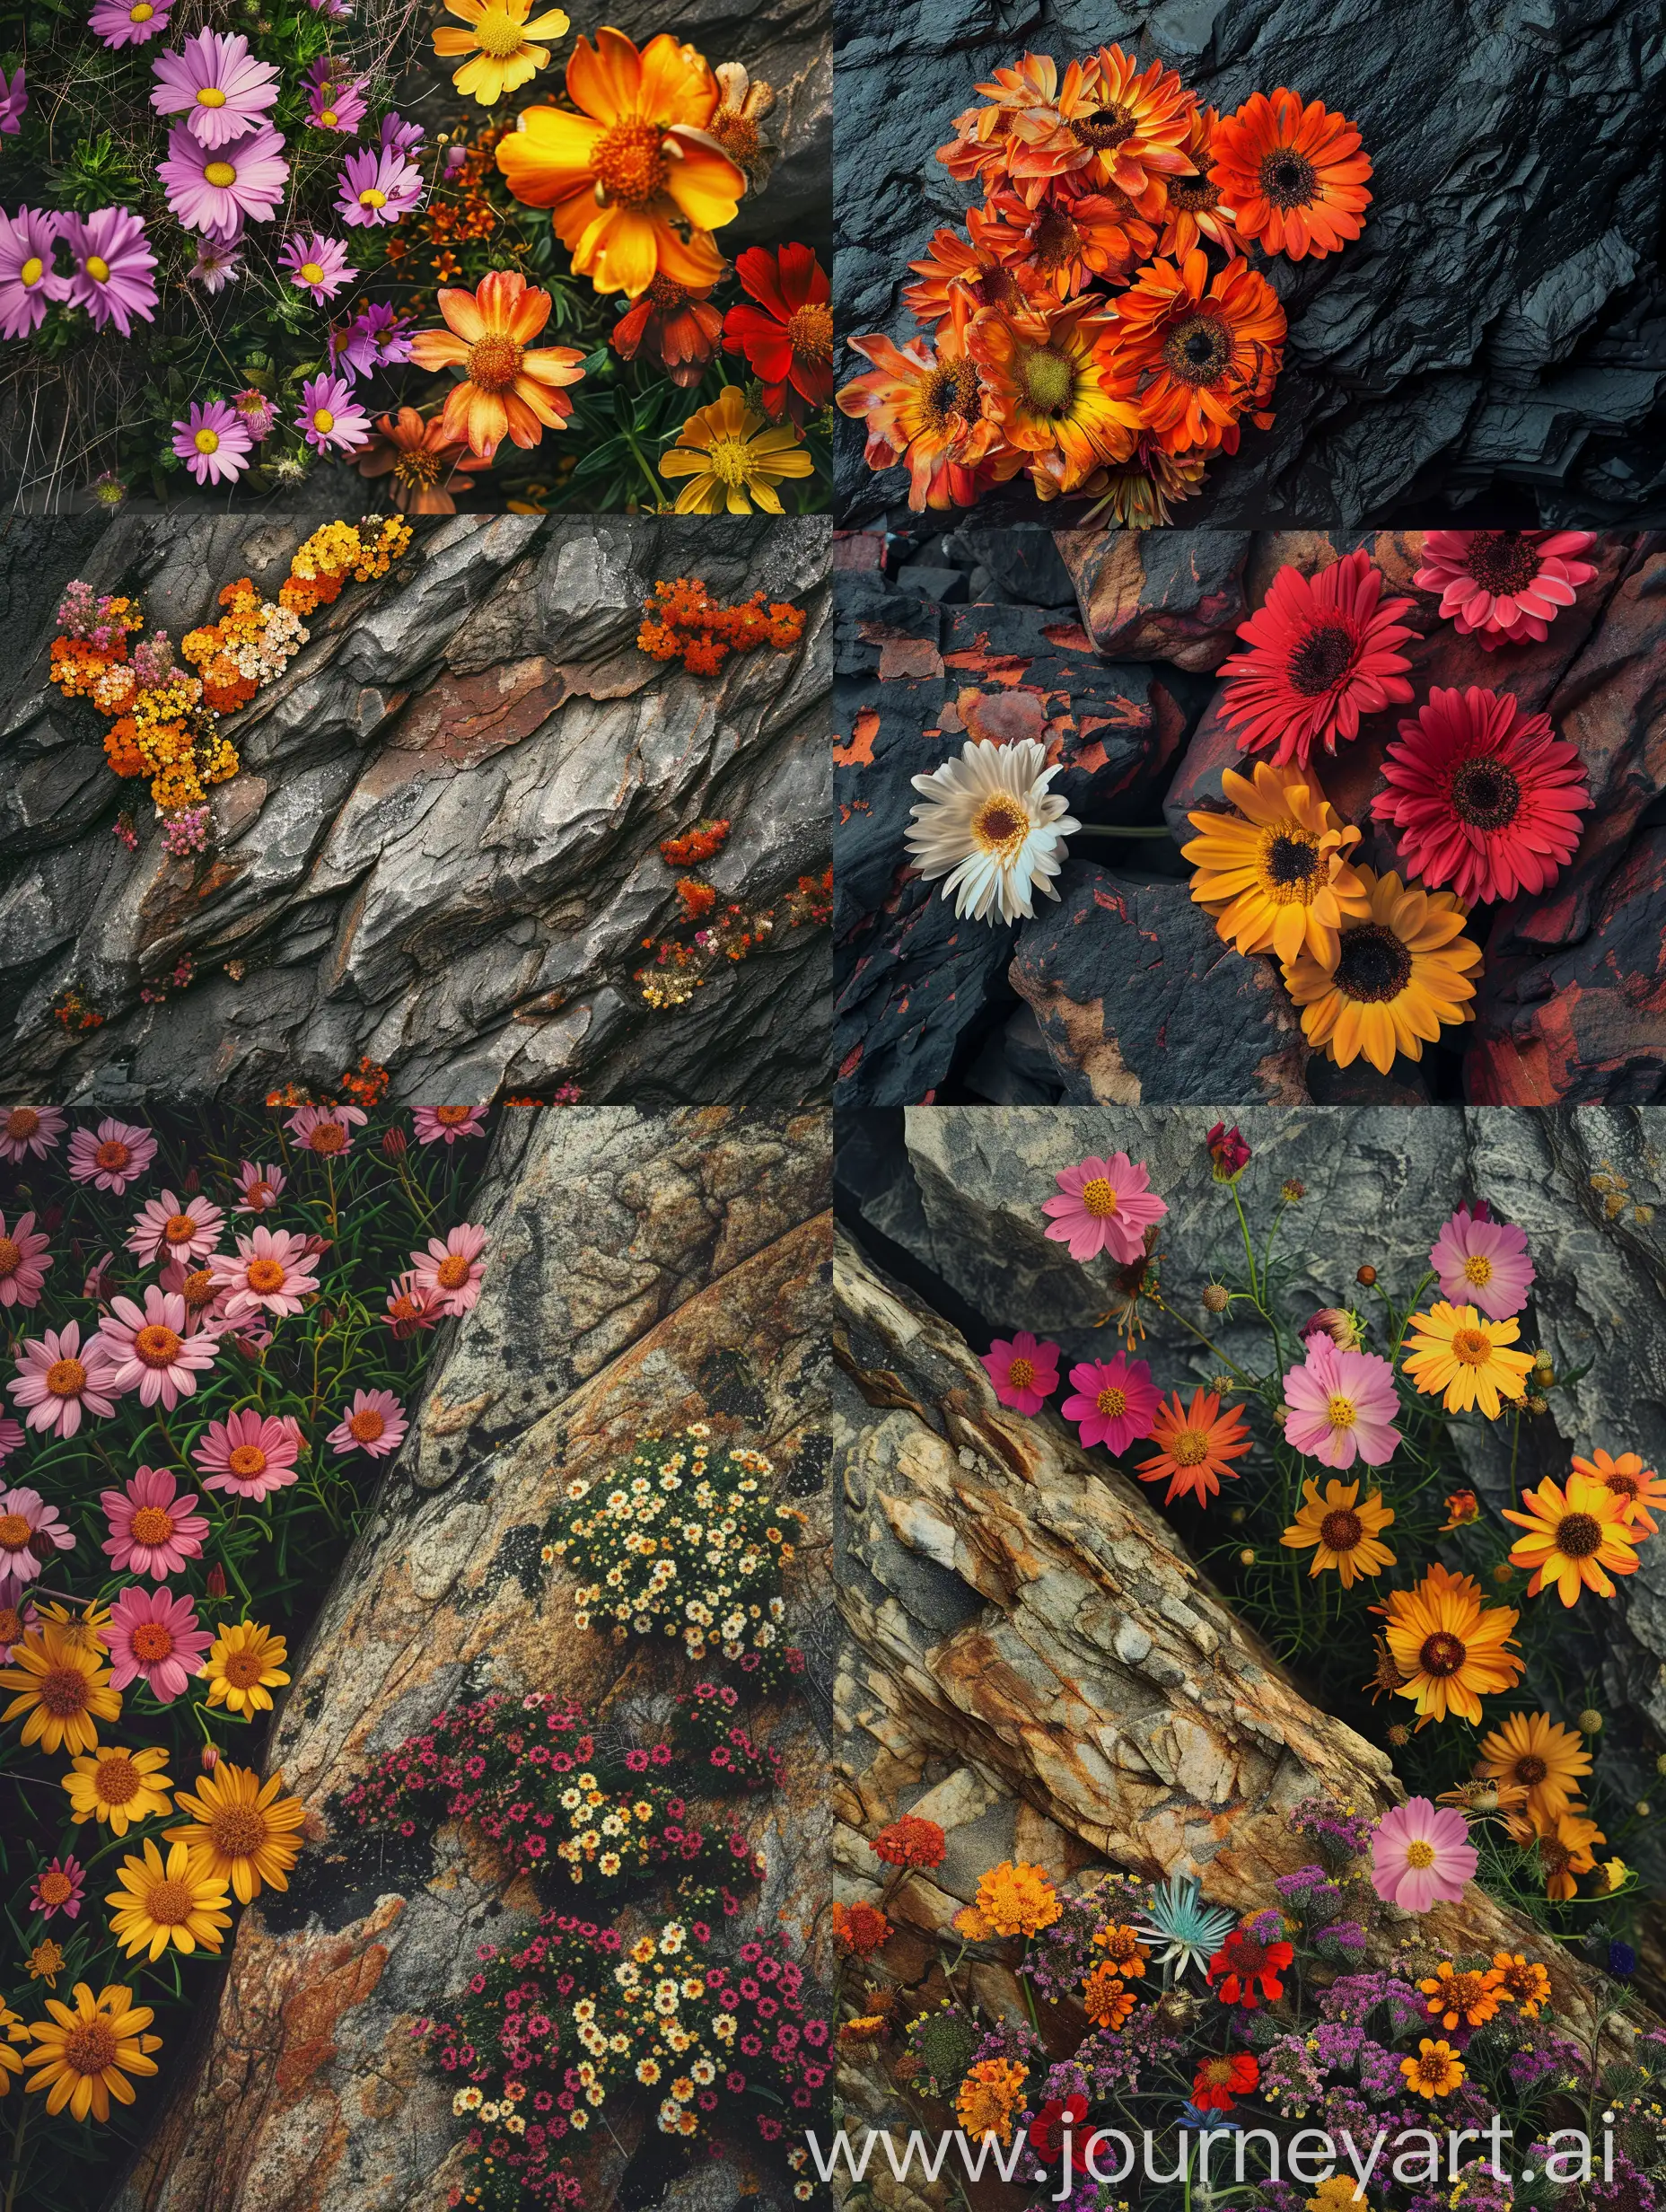 Vibrant-Flowers-and-Rugged-Rock-A-Contrasting-Landscape